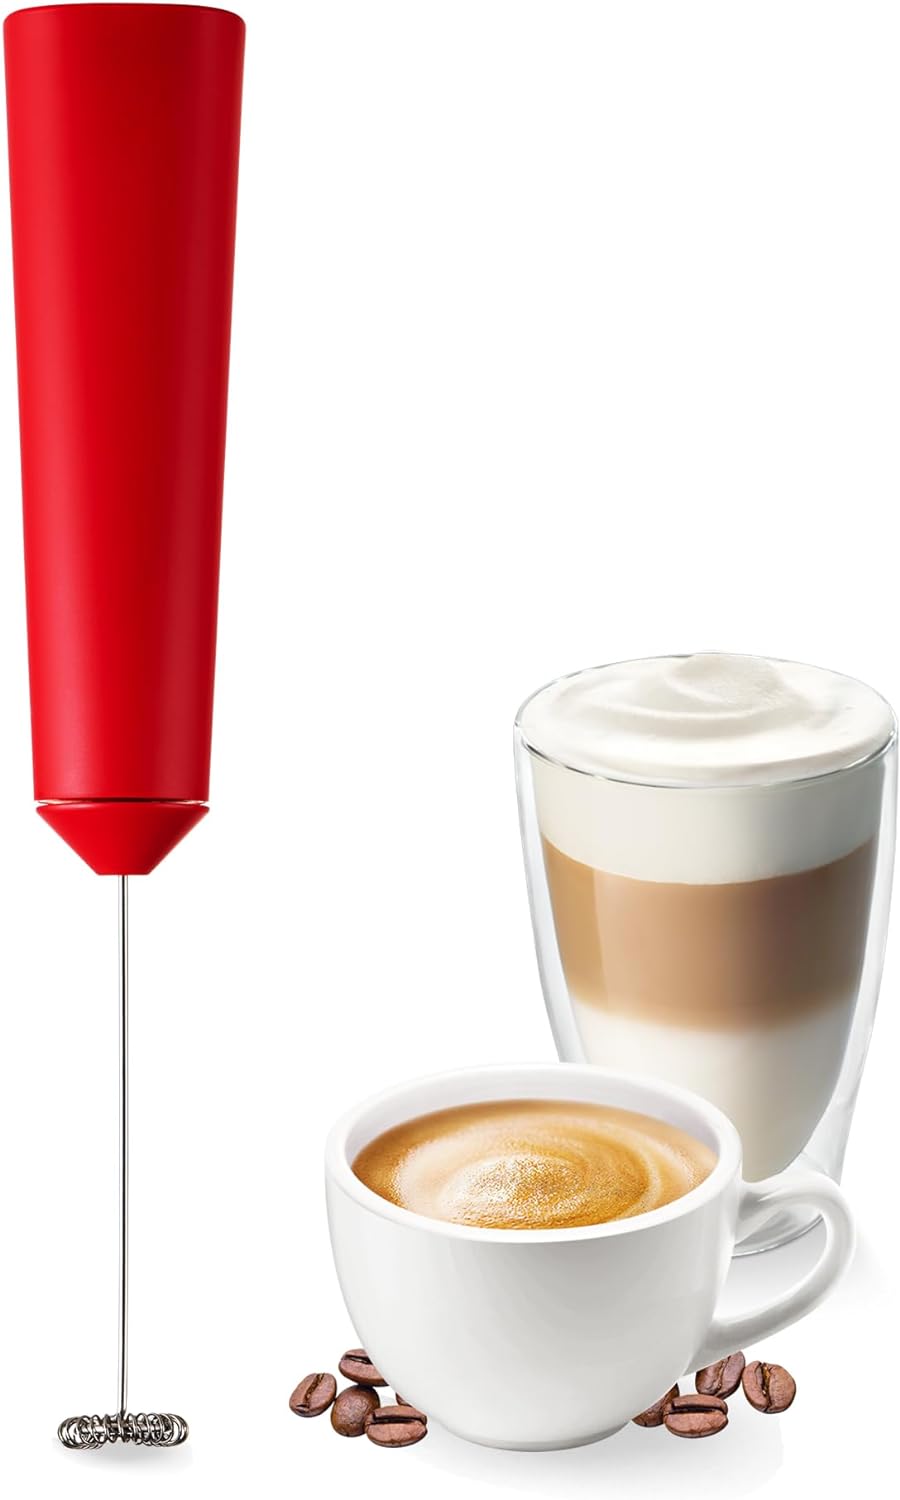 Tchibo Handheld Milk Frother Battery-Operated Dishwasher Safe Stainless Steel Whisk with Usb Charging Cable for Latte Macchiato, Cappuccino and Cocoa, Red